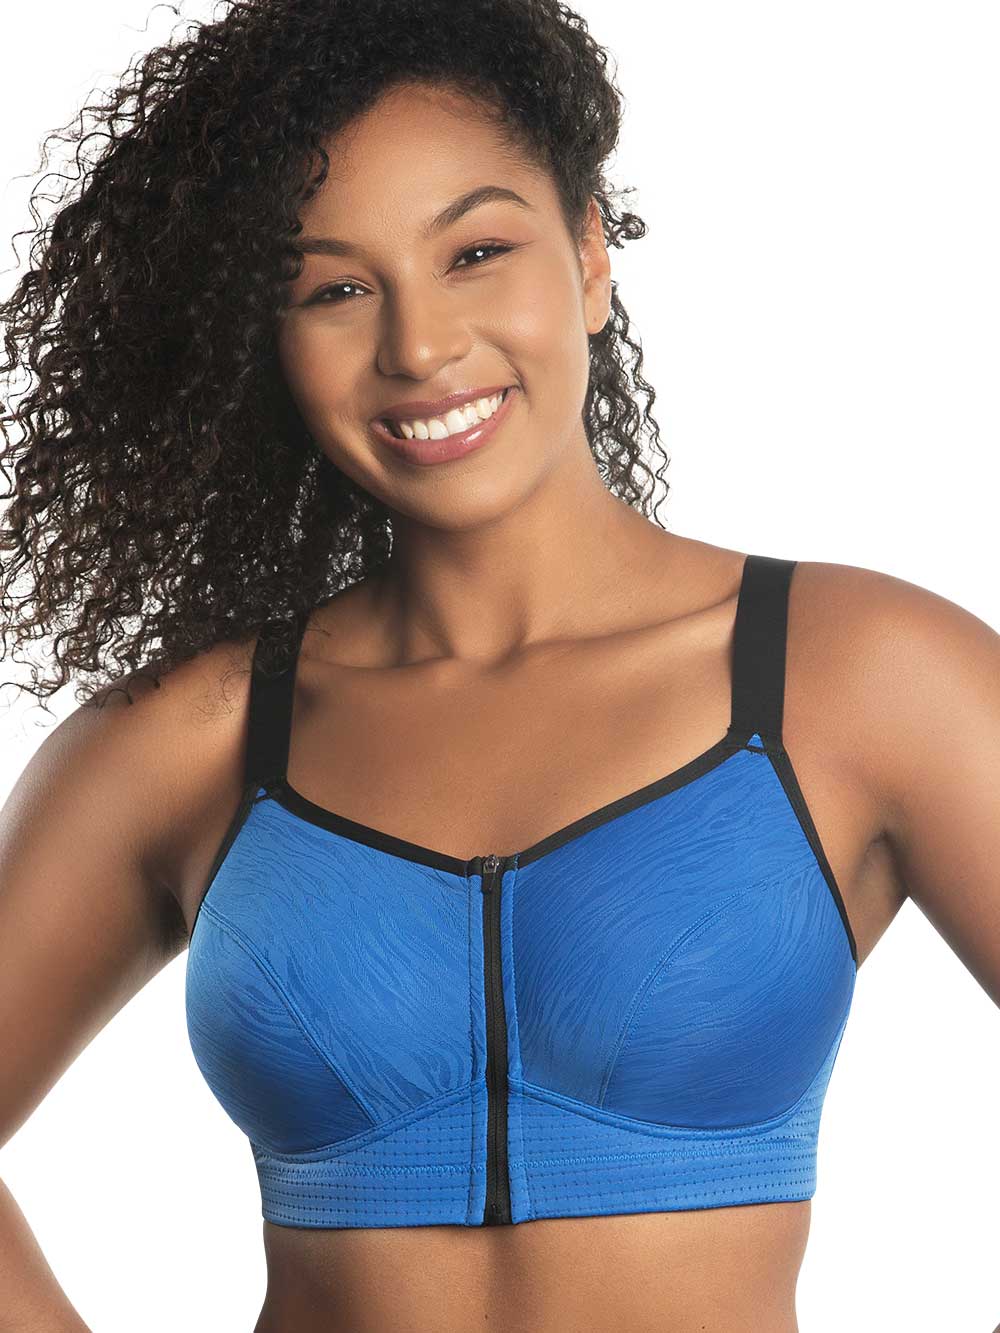 32E Bras: Bras for 32E Boobs and Breast Size Tagged FRONT CLOSURE